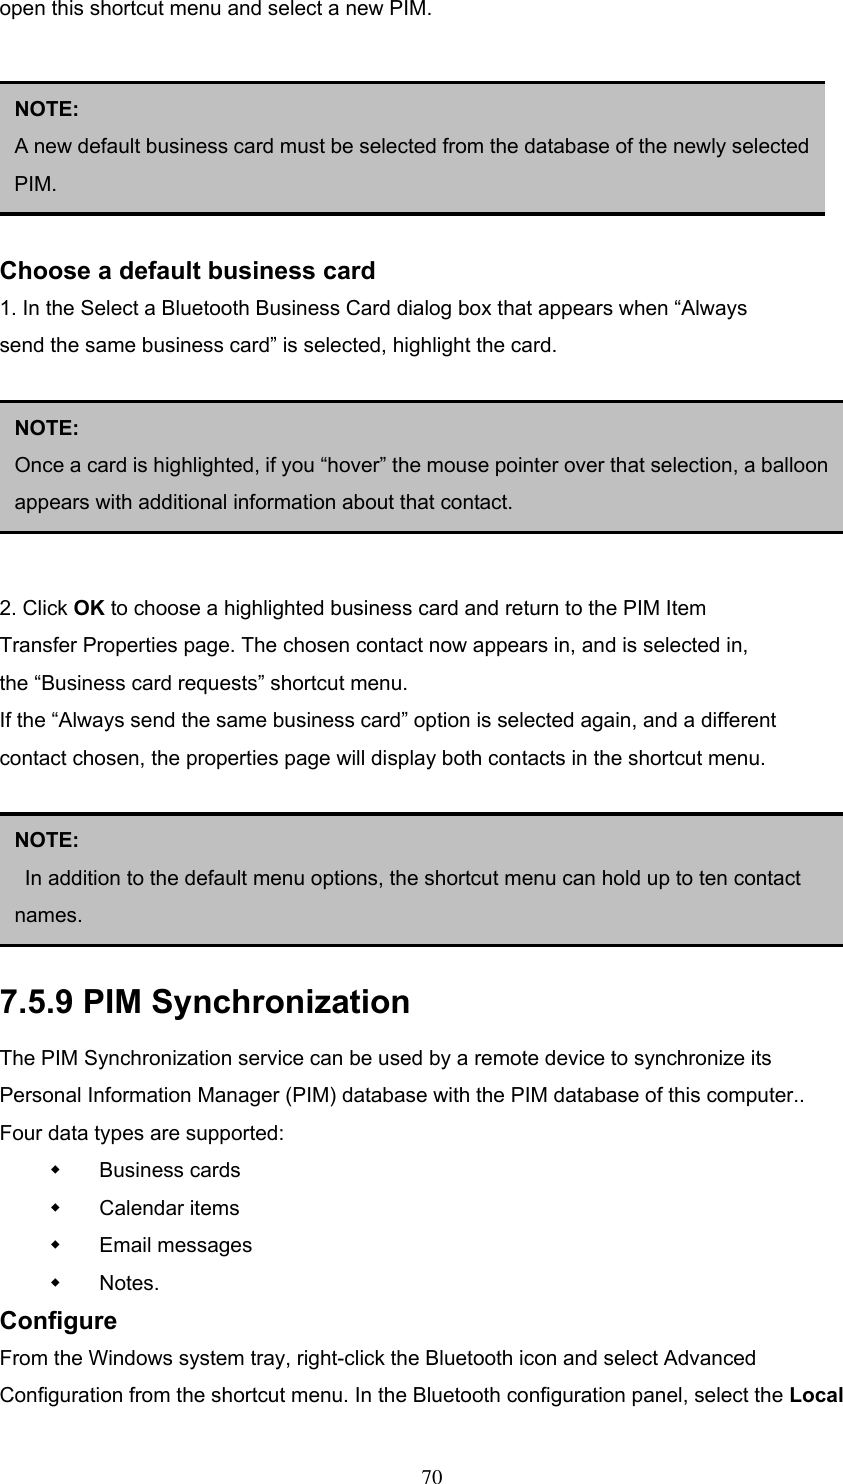 open this shortcut menu and select a new PIM.       Choose a default business card 1. In the Select a Bluetooth Business Card dialog box that appears when “Always send the same business card” is selected, highlight the card.       2. Click OK to choose a highlighted business card and return to the PIM Item Transfer Properties page. The chosen contact now appears in, and is selected in, the “Business card requests” shortcut menu. If the “Always send the same business card” option is selected again, and a different contact chosen, the properties page will display both contacts in the shortcut menu.      NOTE:  A new default business card must be selected from the database of the newly selectedPIM. NOTE:  Once a card is highlighted, if you “hover” the mouse pointer over that selection, a balloonappears with additional information about that contact. NOTE:   In addition to the default menu options, the shortcut menu can hold up to ten contact names. 7.5.9 PIM Synchronization The PIM Synchronization service can be used by a remote device to synchronize its Personal Information Manager (PIM) database with the PIM database of this computer.. Four data types are supported:   Business cards   Calendar items   Email messages   Notes. Configure From the Windows system tray, right-click the Bluetooth icon and select Advanced Configuration from the shortcut menu. In the Bluetooth configuration panel, select the Local  70 